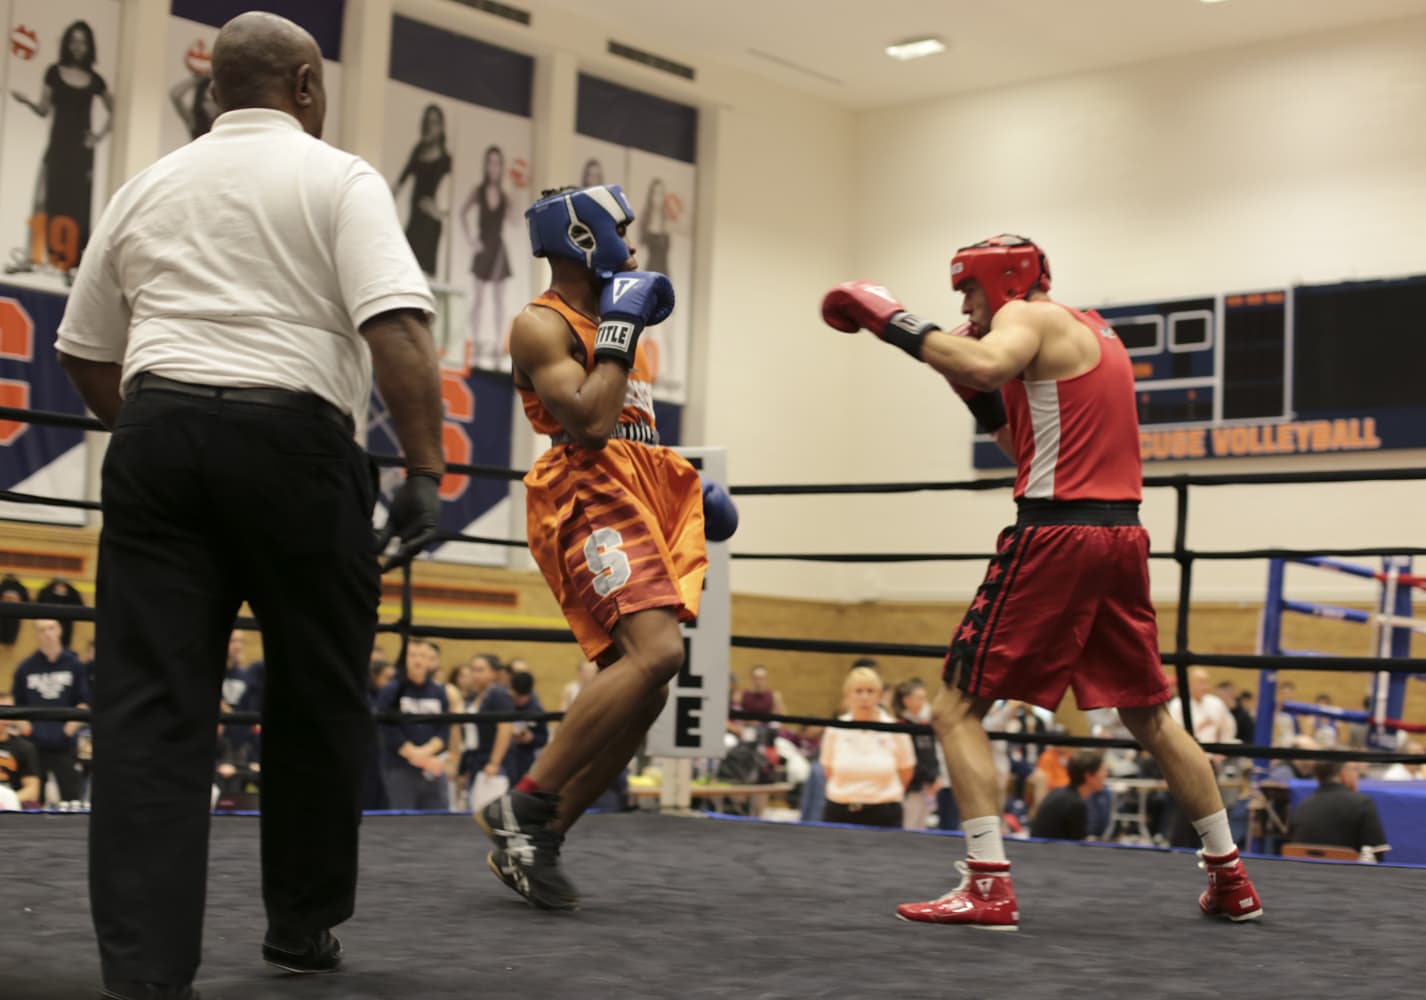 U.S. Intercollegiate Boxing Association's national tournament at Syracuse University on March 23, 2019